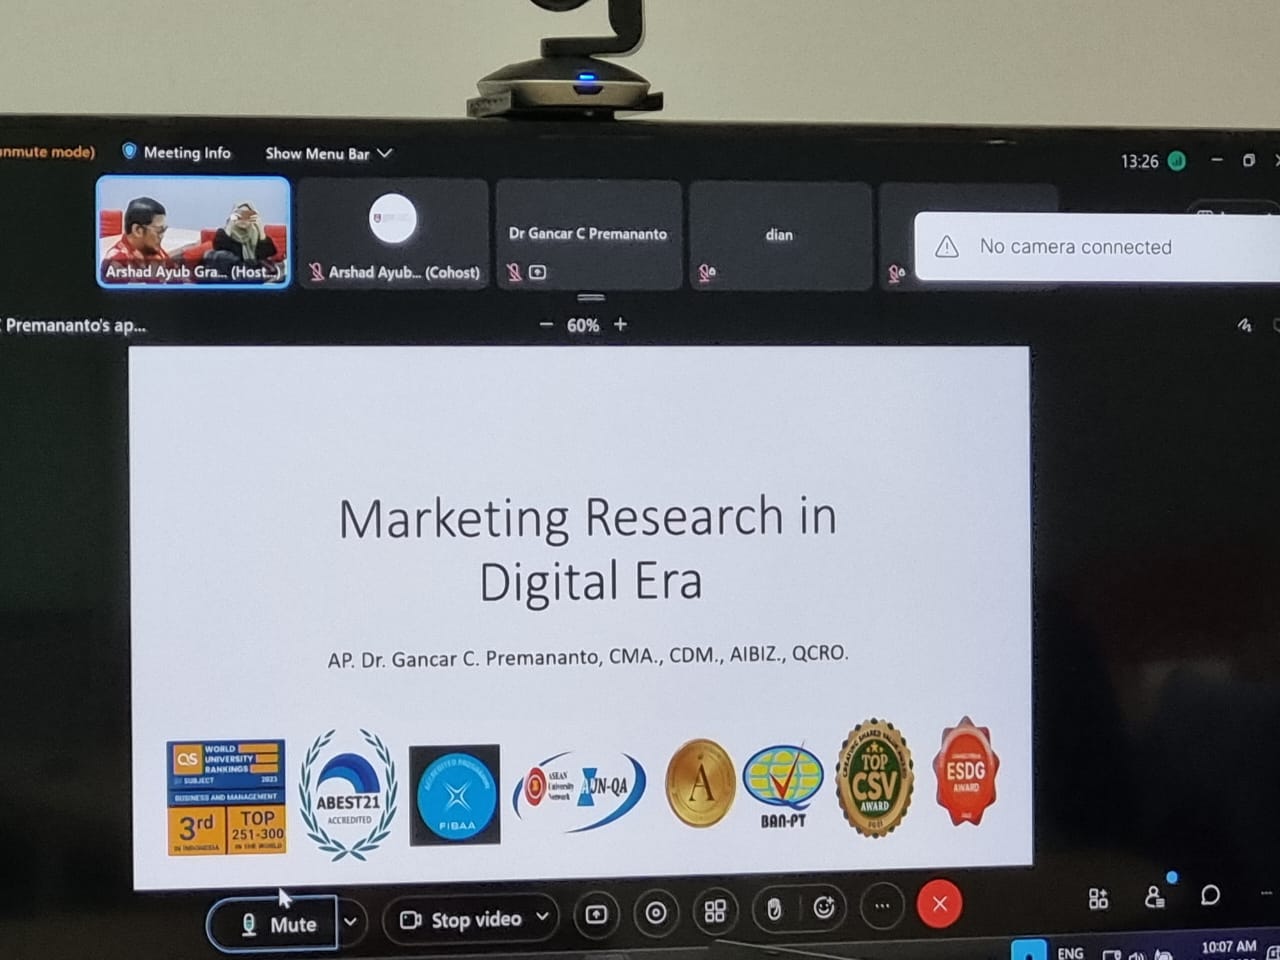 Sessions Sharing Marketing Research In Digital Era 3